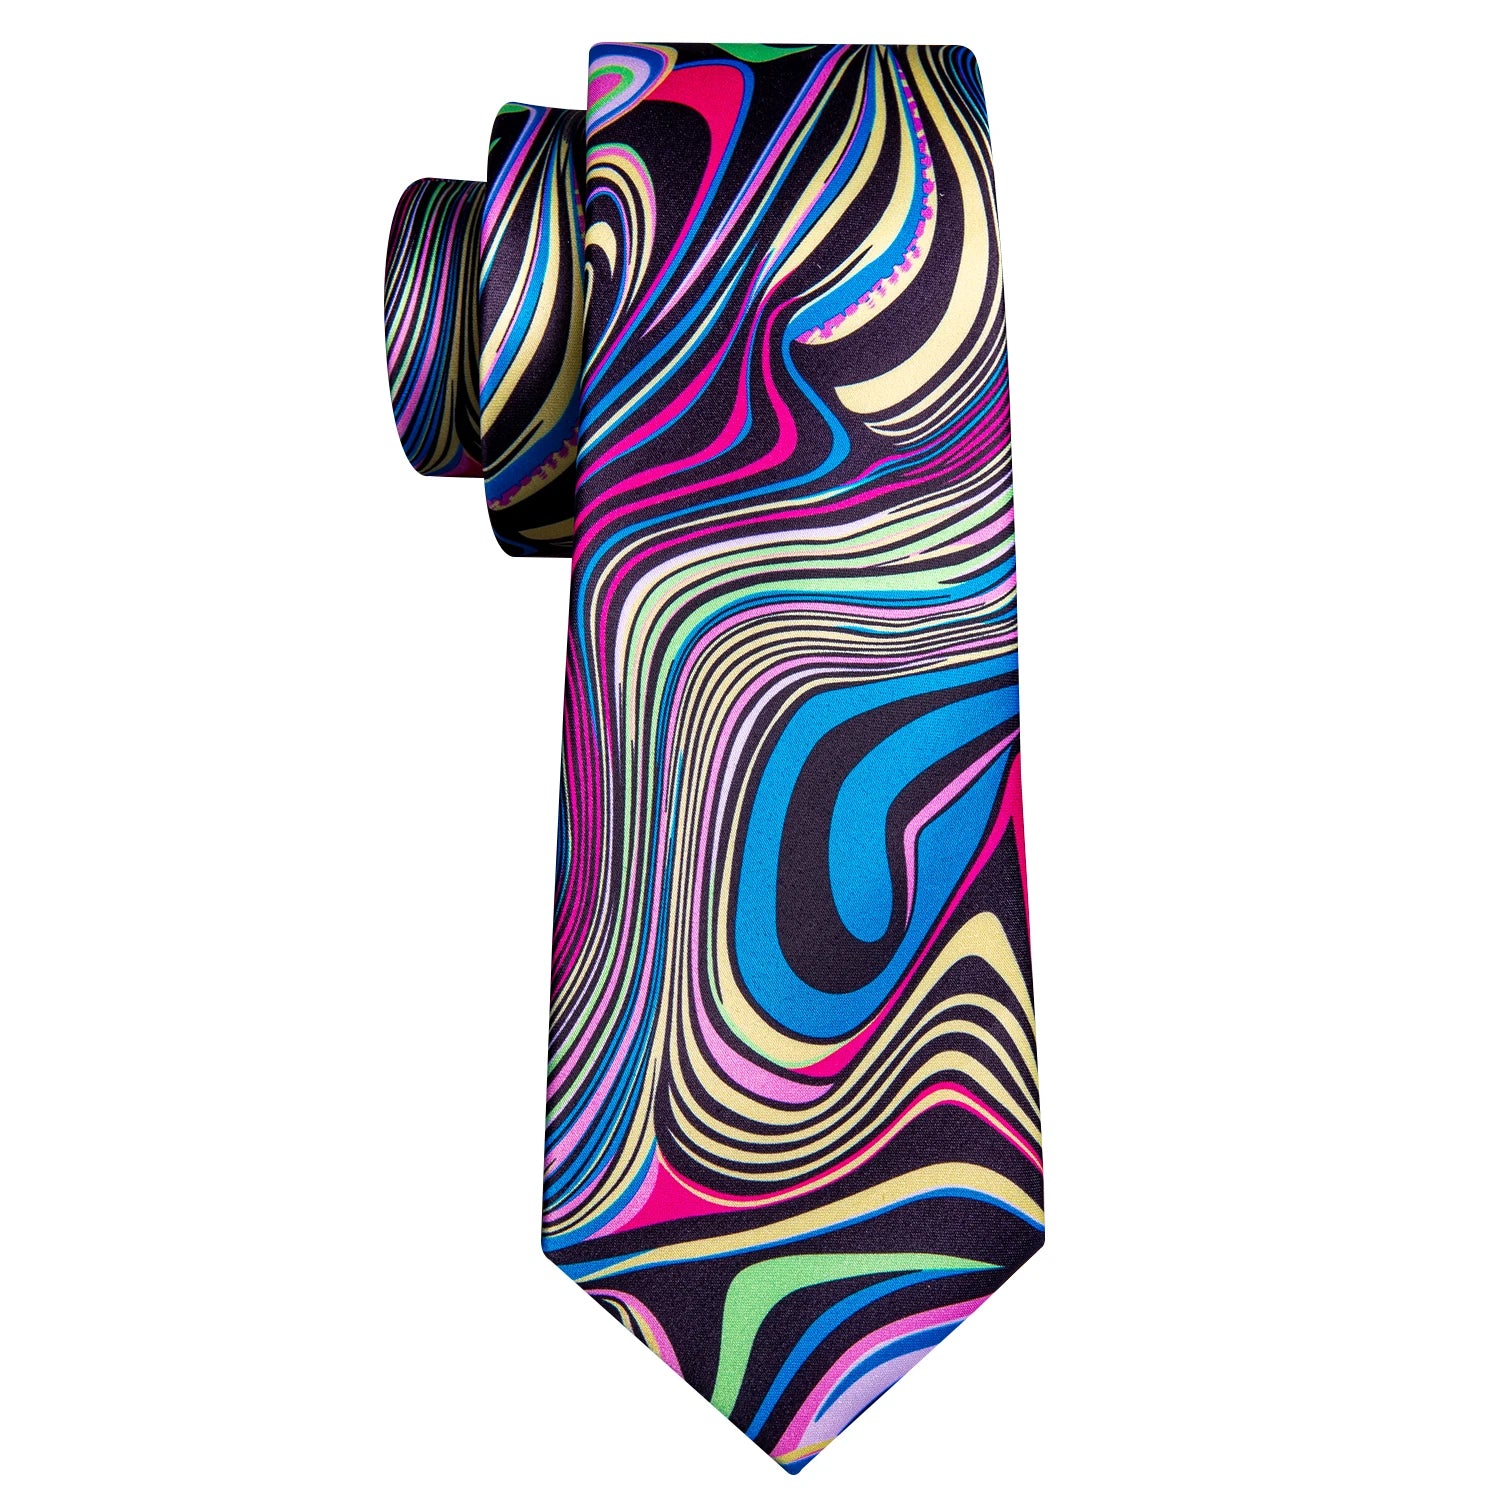 Luxury Barry.Wang Modern Abstract Multicolor Design Necktie with Pocket Square and Cufflinks Set